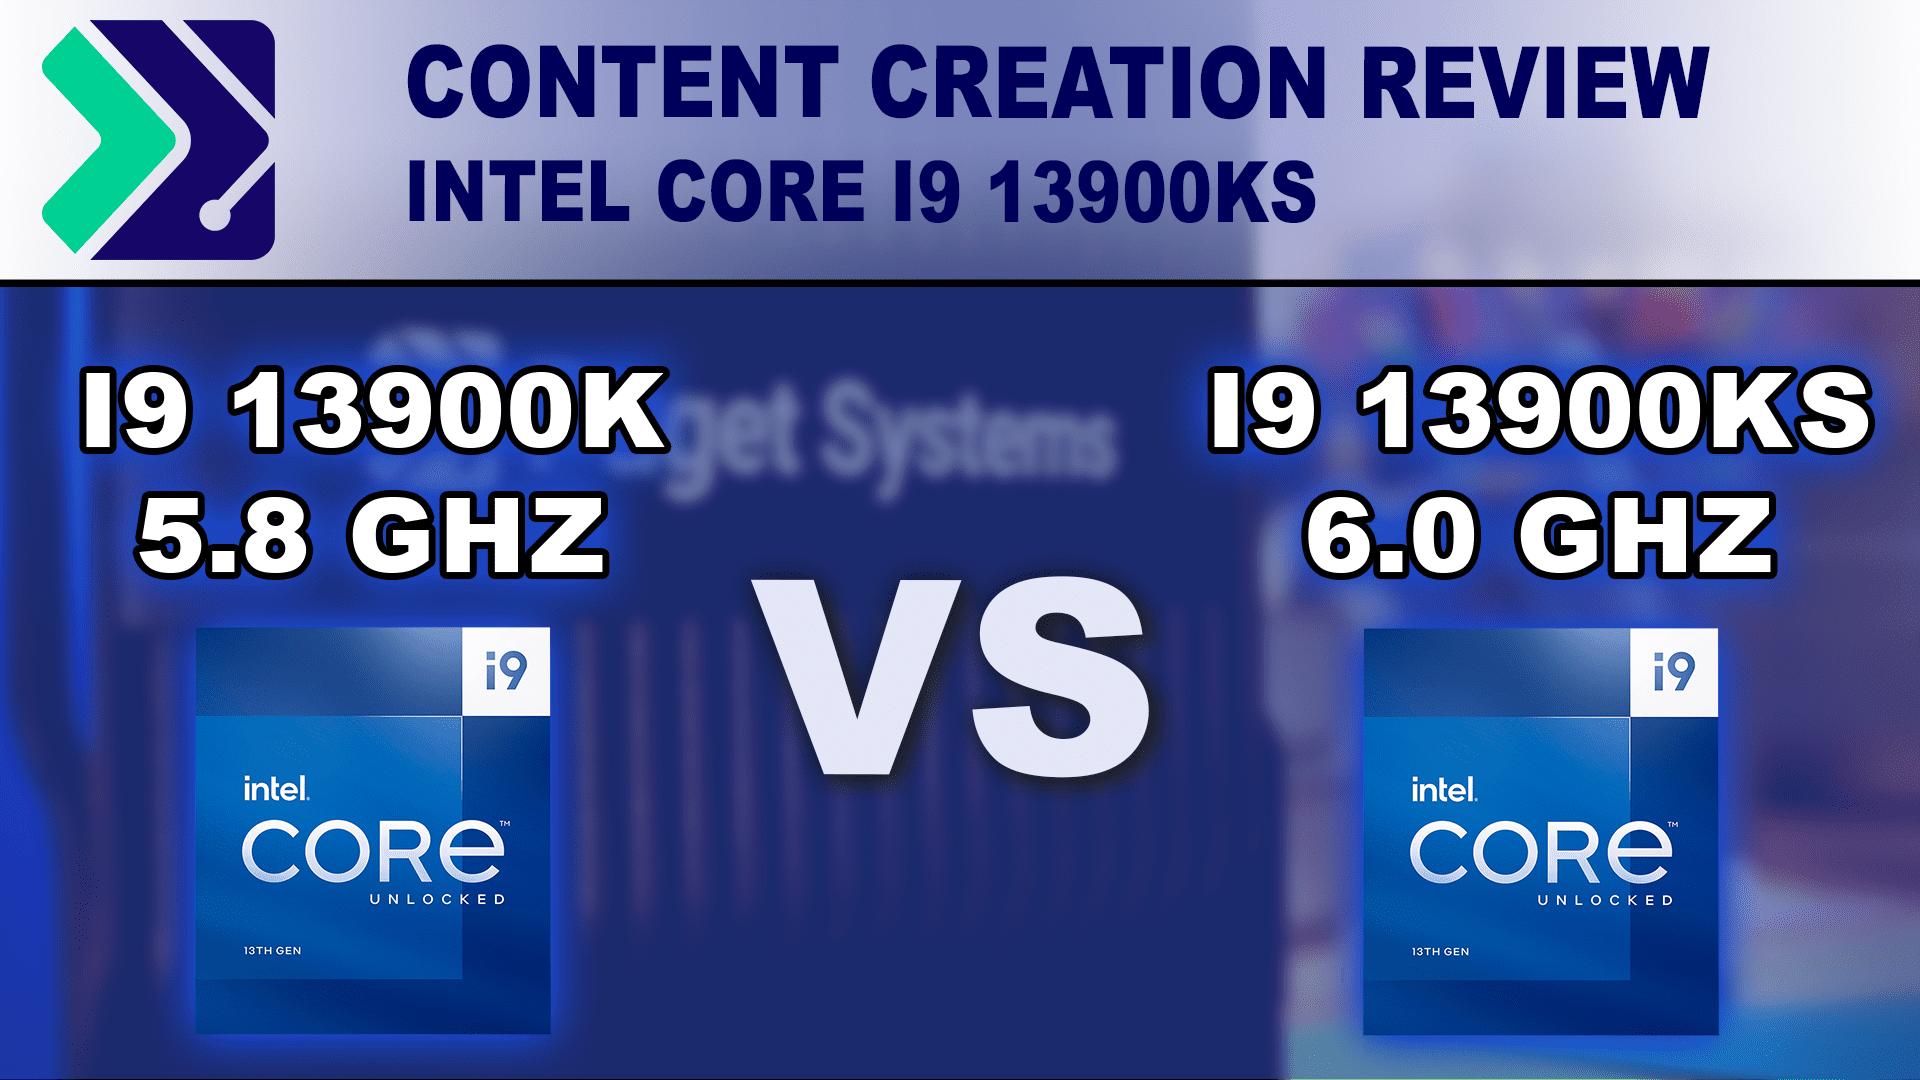 Intel Core i9-12900K review: Intel's return to form